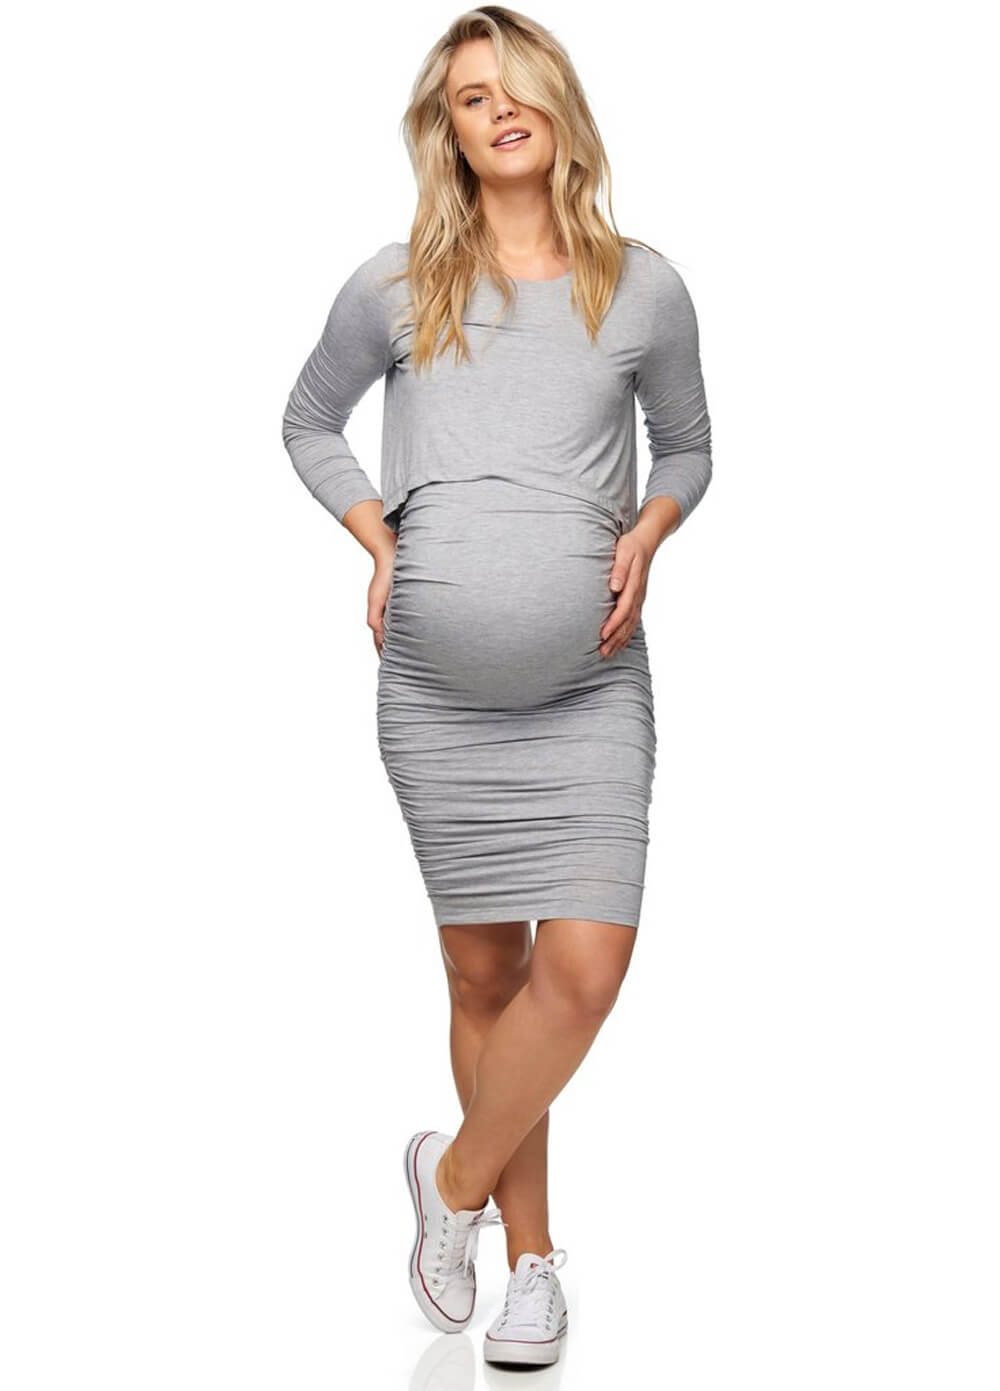 Nostalgia Layered Maternity Nursing Dress in Grey by Bae The Label